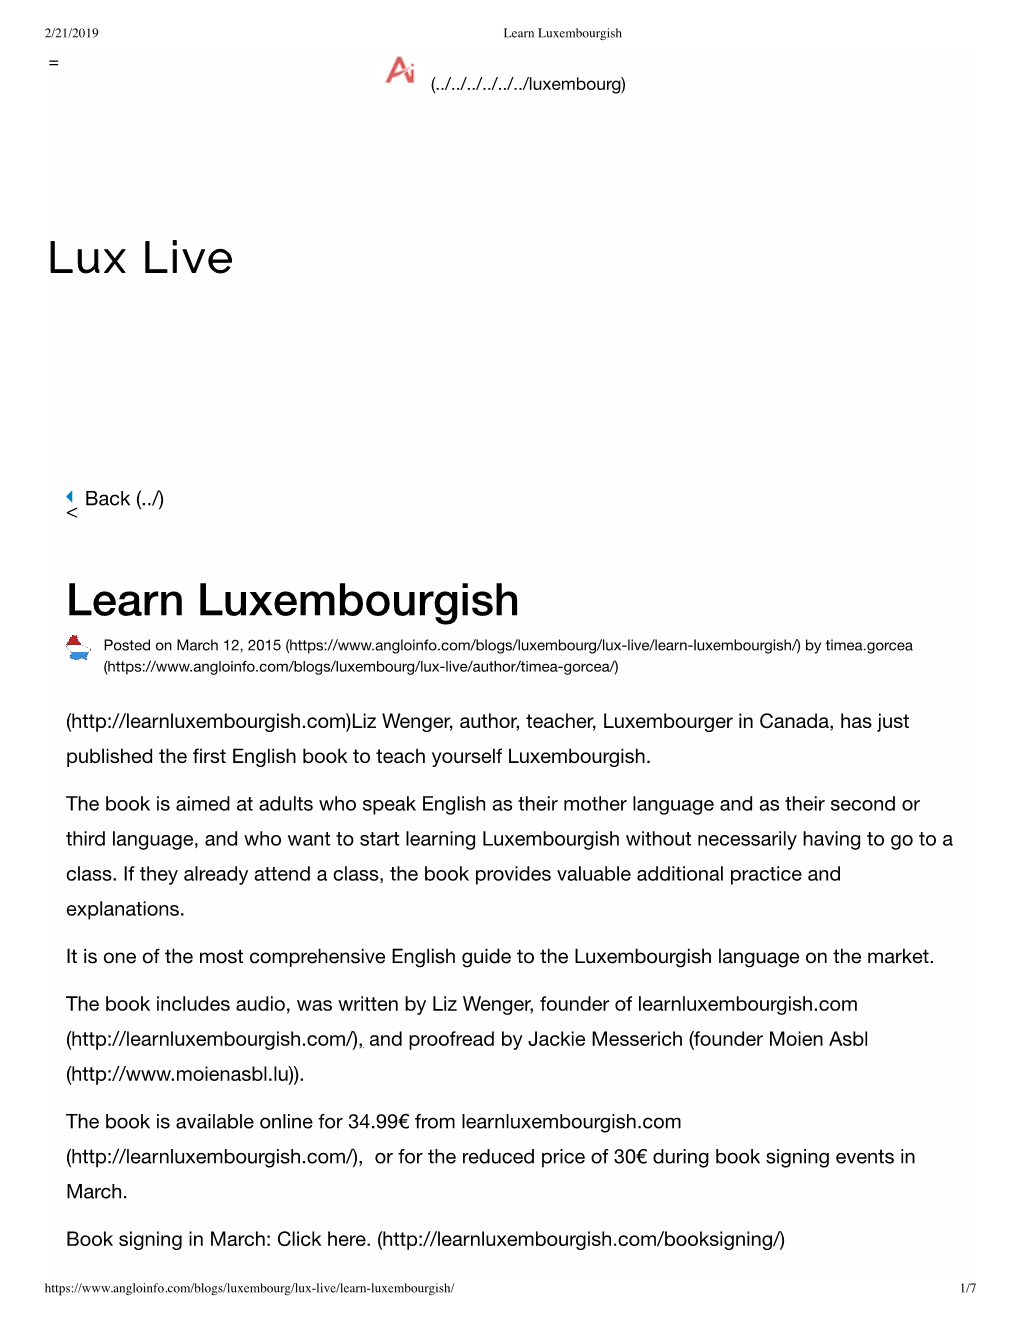 Learn Luxembourgish = (../../../../../../Luxembourg)